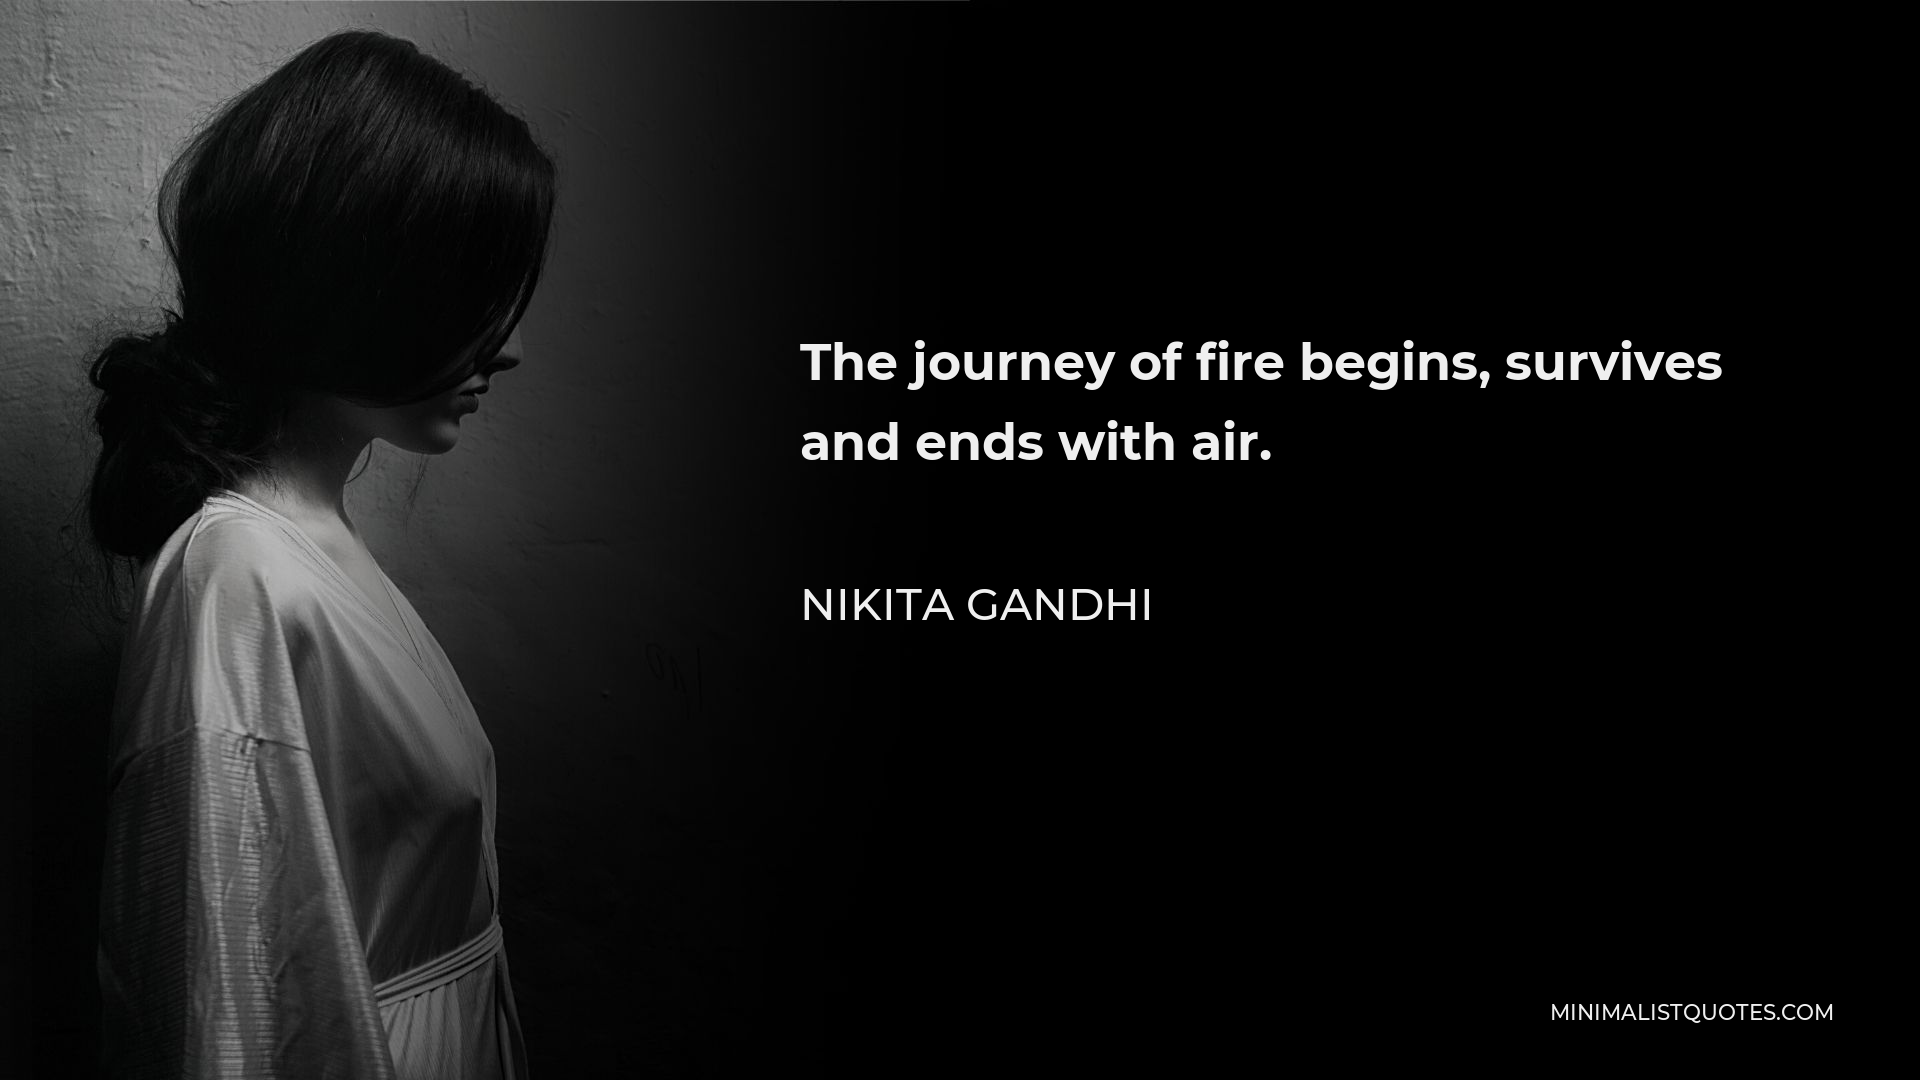 Nikita Gandhi Quote - The journey of fire begins, survives and ends with air.